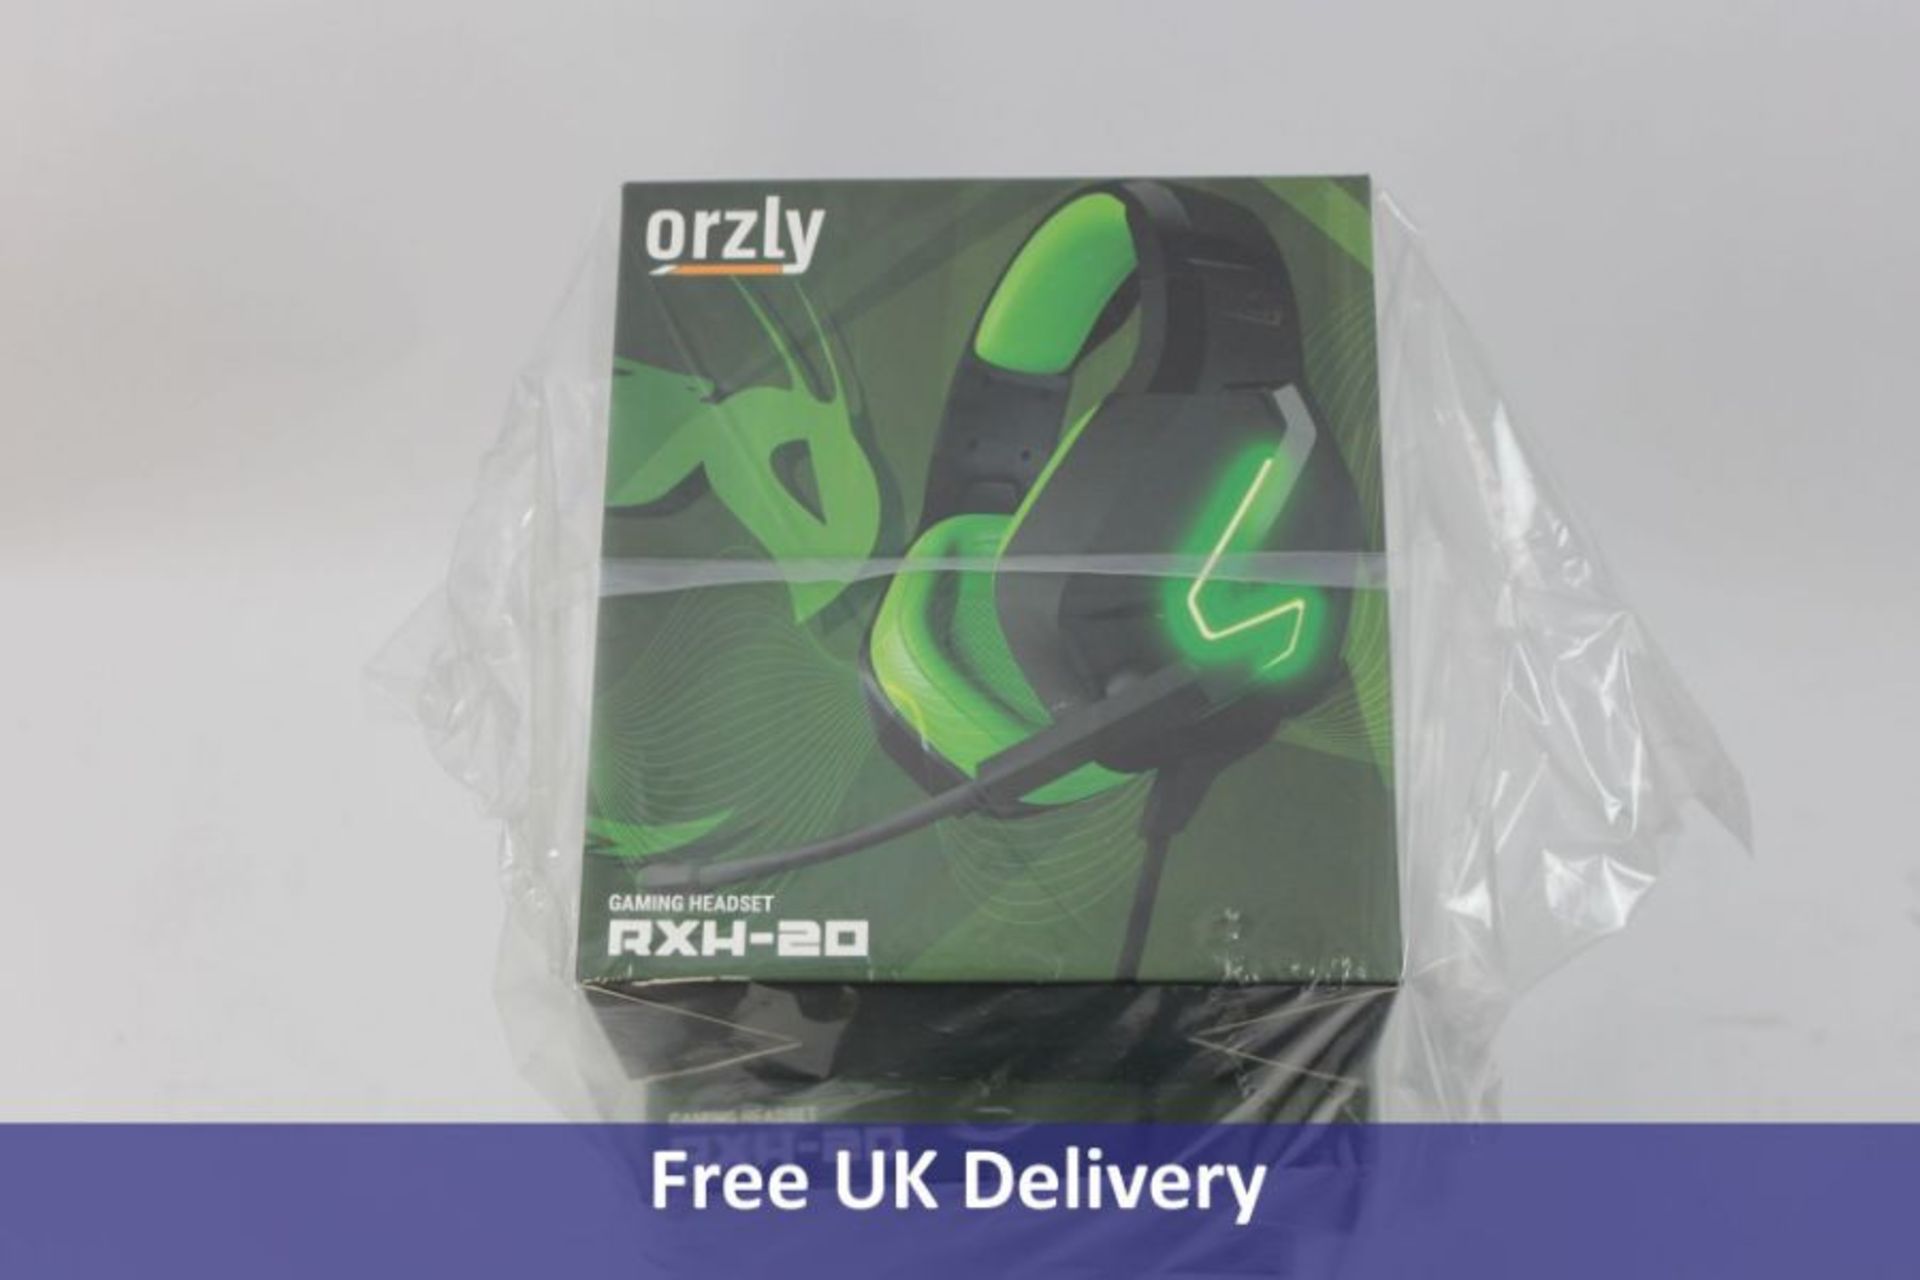 Five Hornet Sagano Edition RXH-20 Gaming Headsets, Green